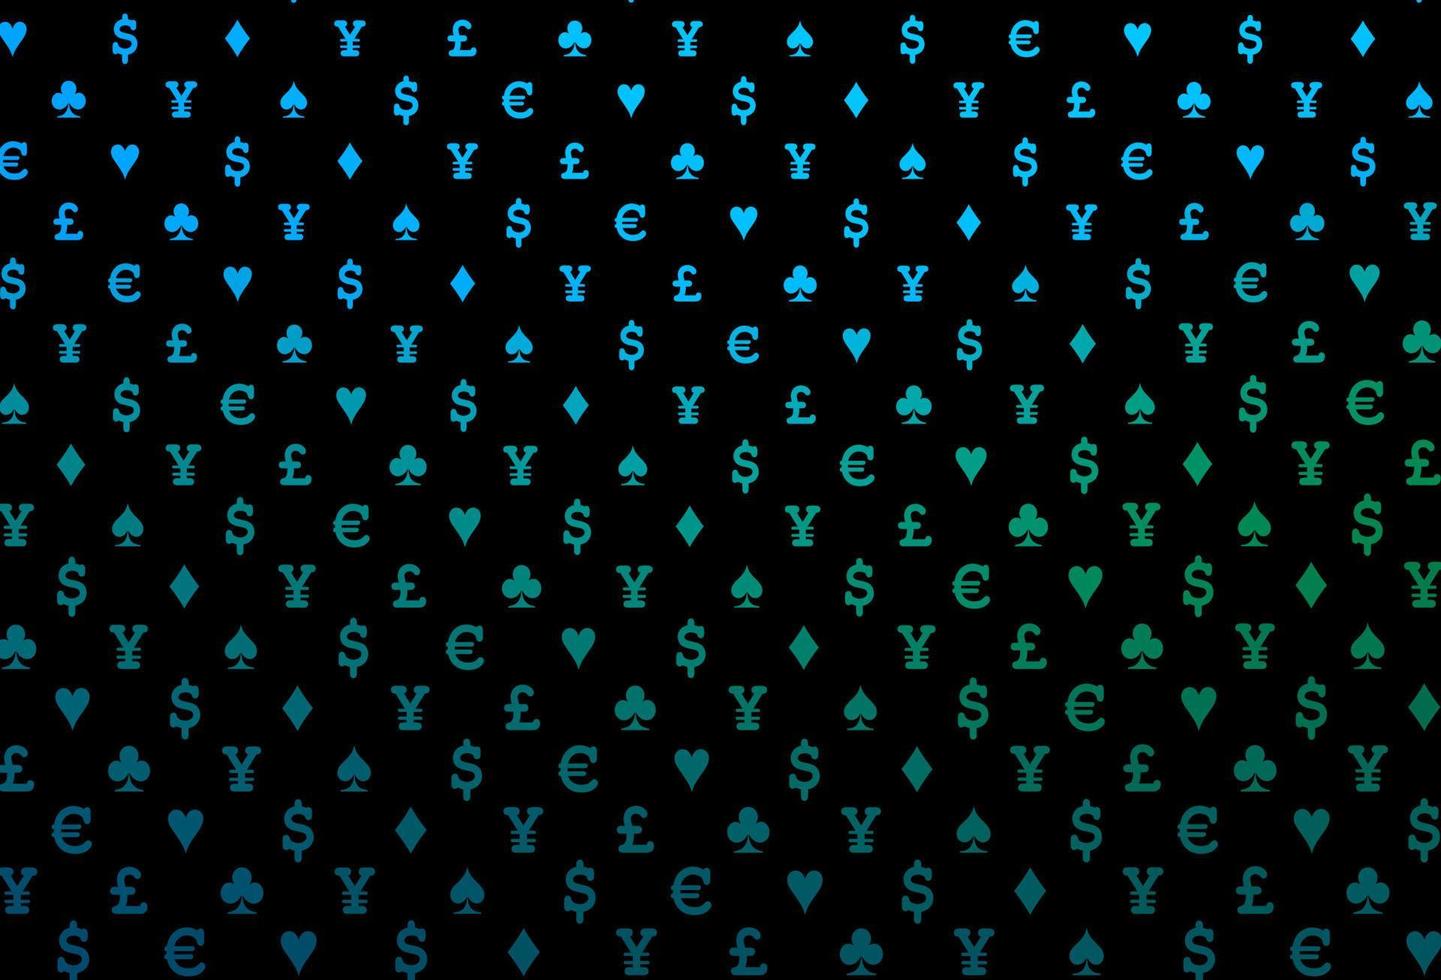 Dark blue, green vector cover with symbols of gamble.